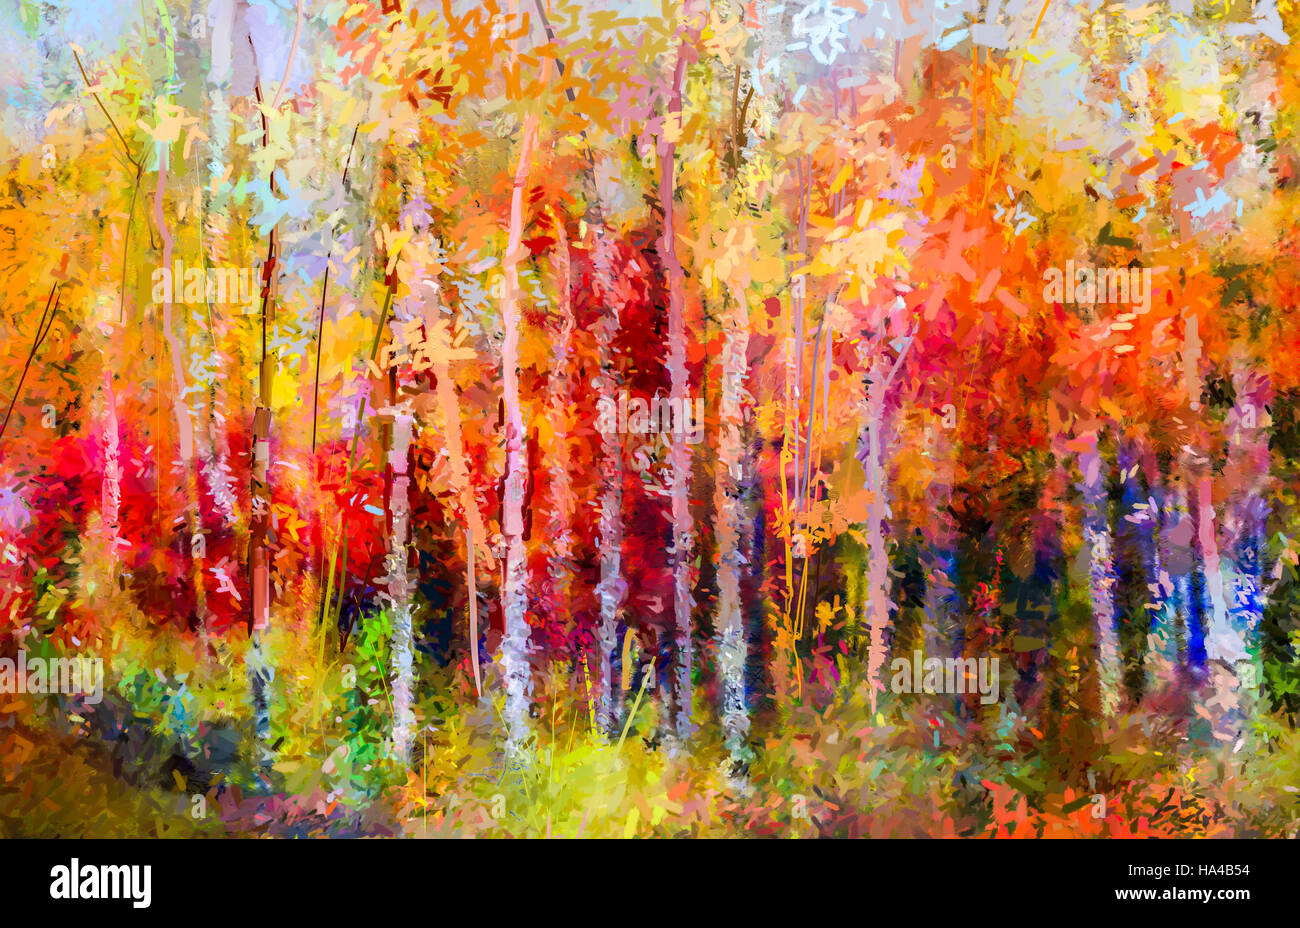 Oil painting landscape - colorful autumn trees. Semi abstract paintings image of forest, aspen tree with yellow and red leaf. Autumn, Fall season natu Stock Photo